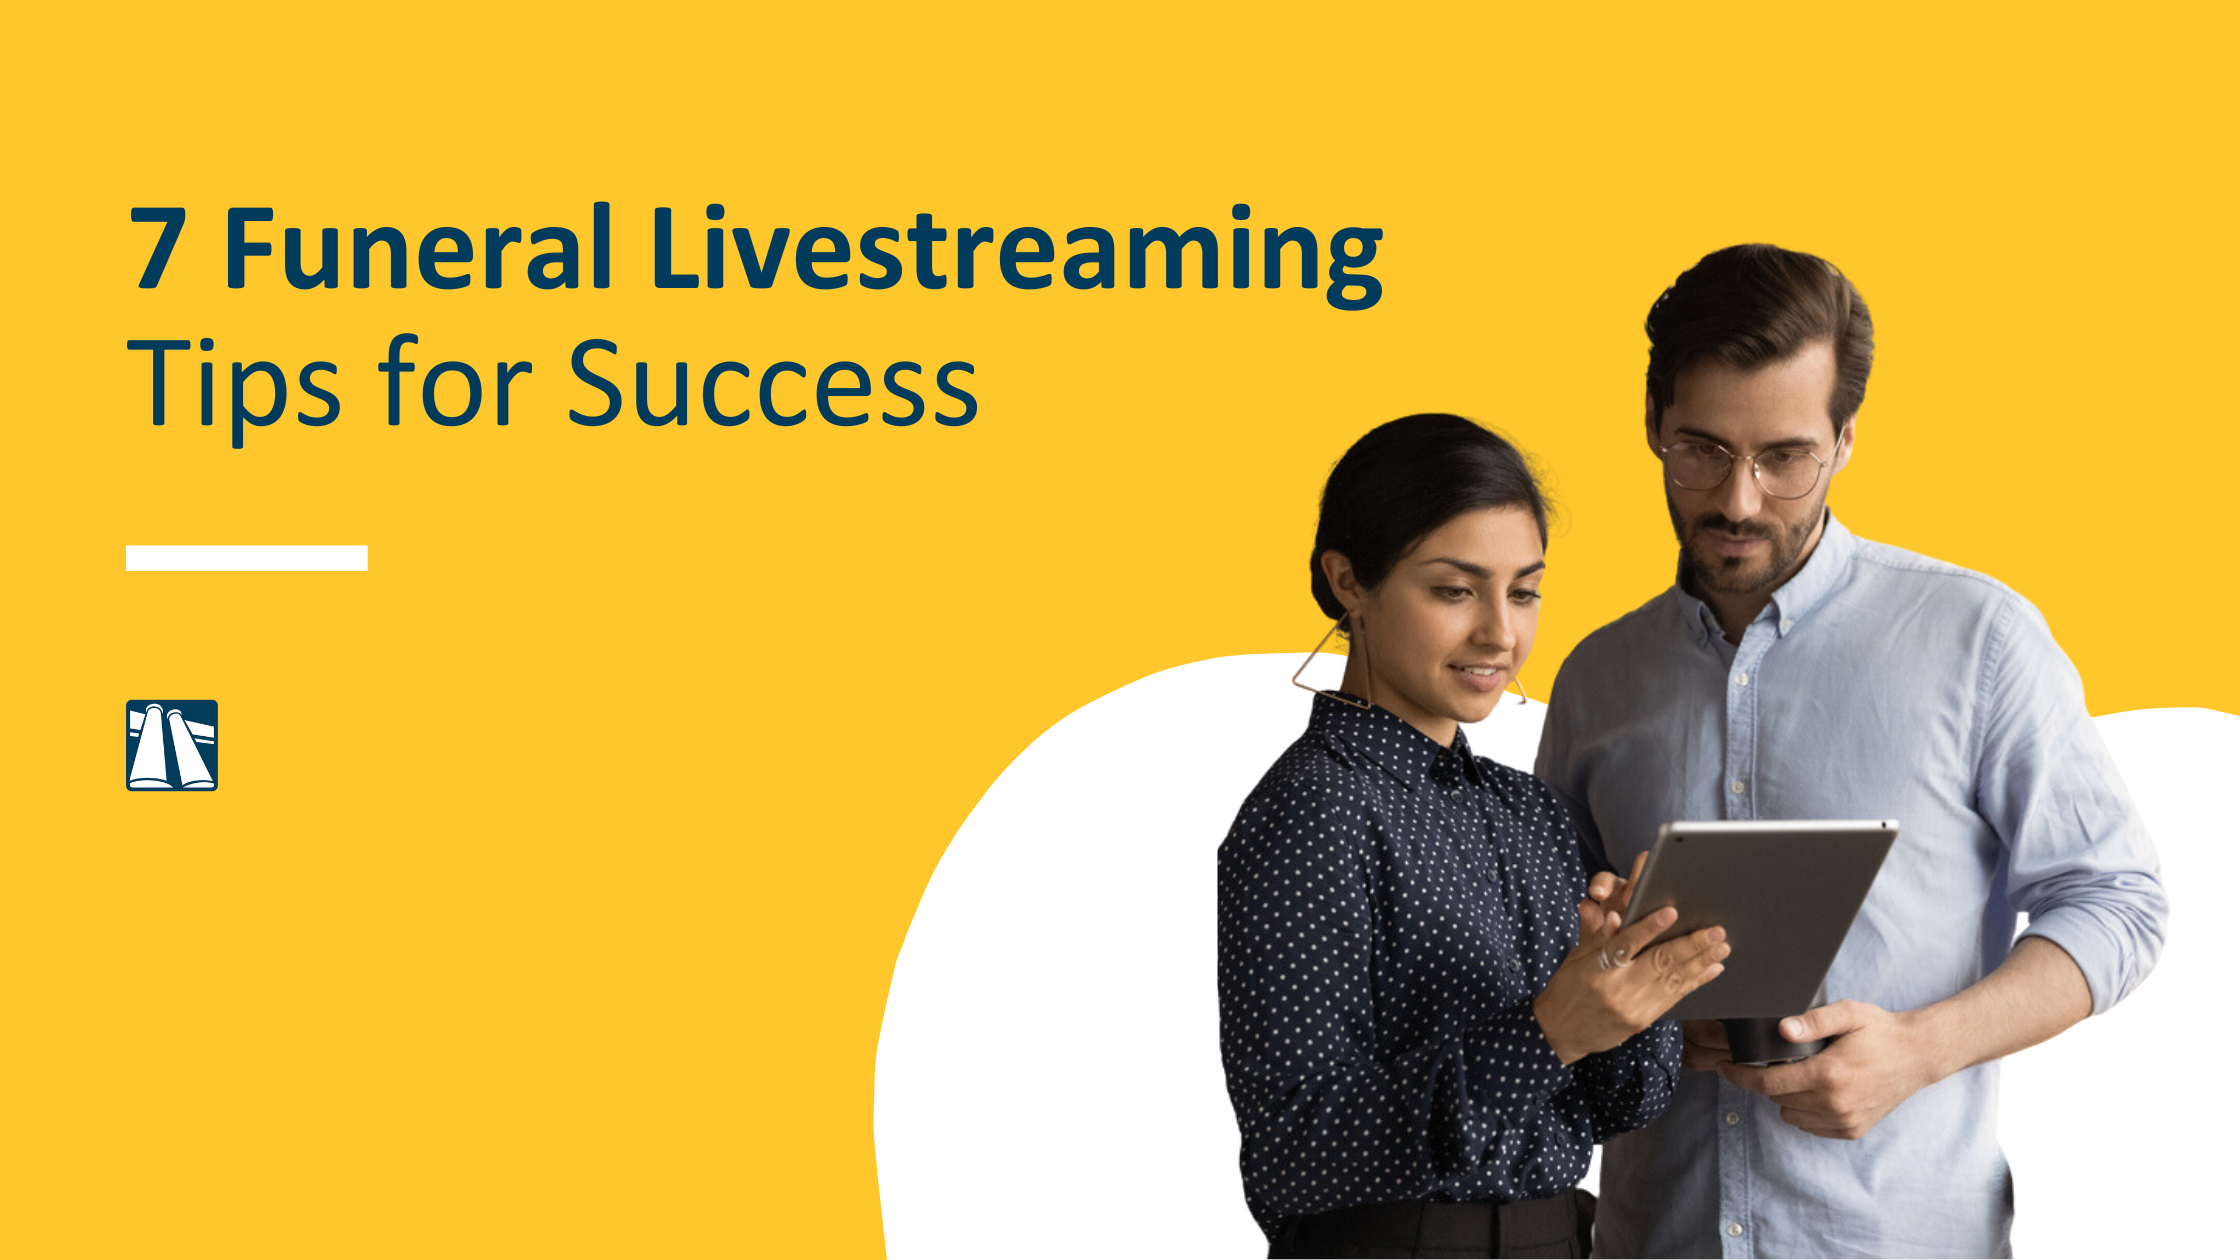 funeral livestreaming tips for success